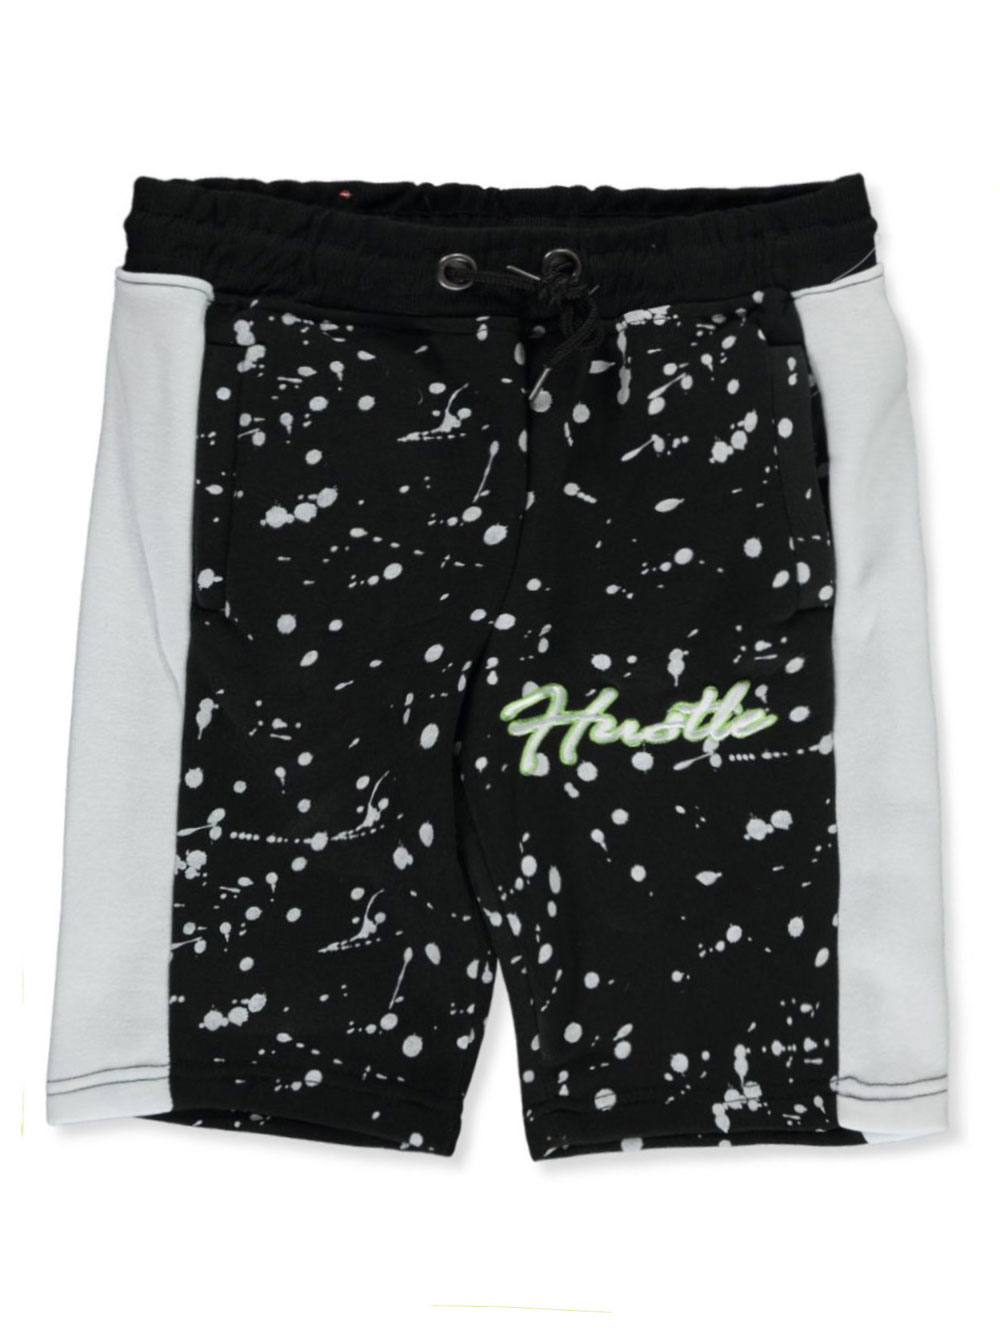 Size 10-12 Shorts for Boys